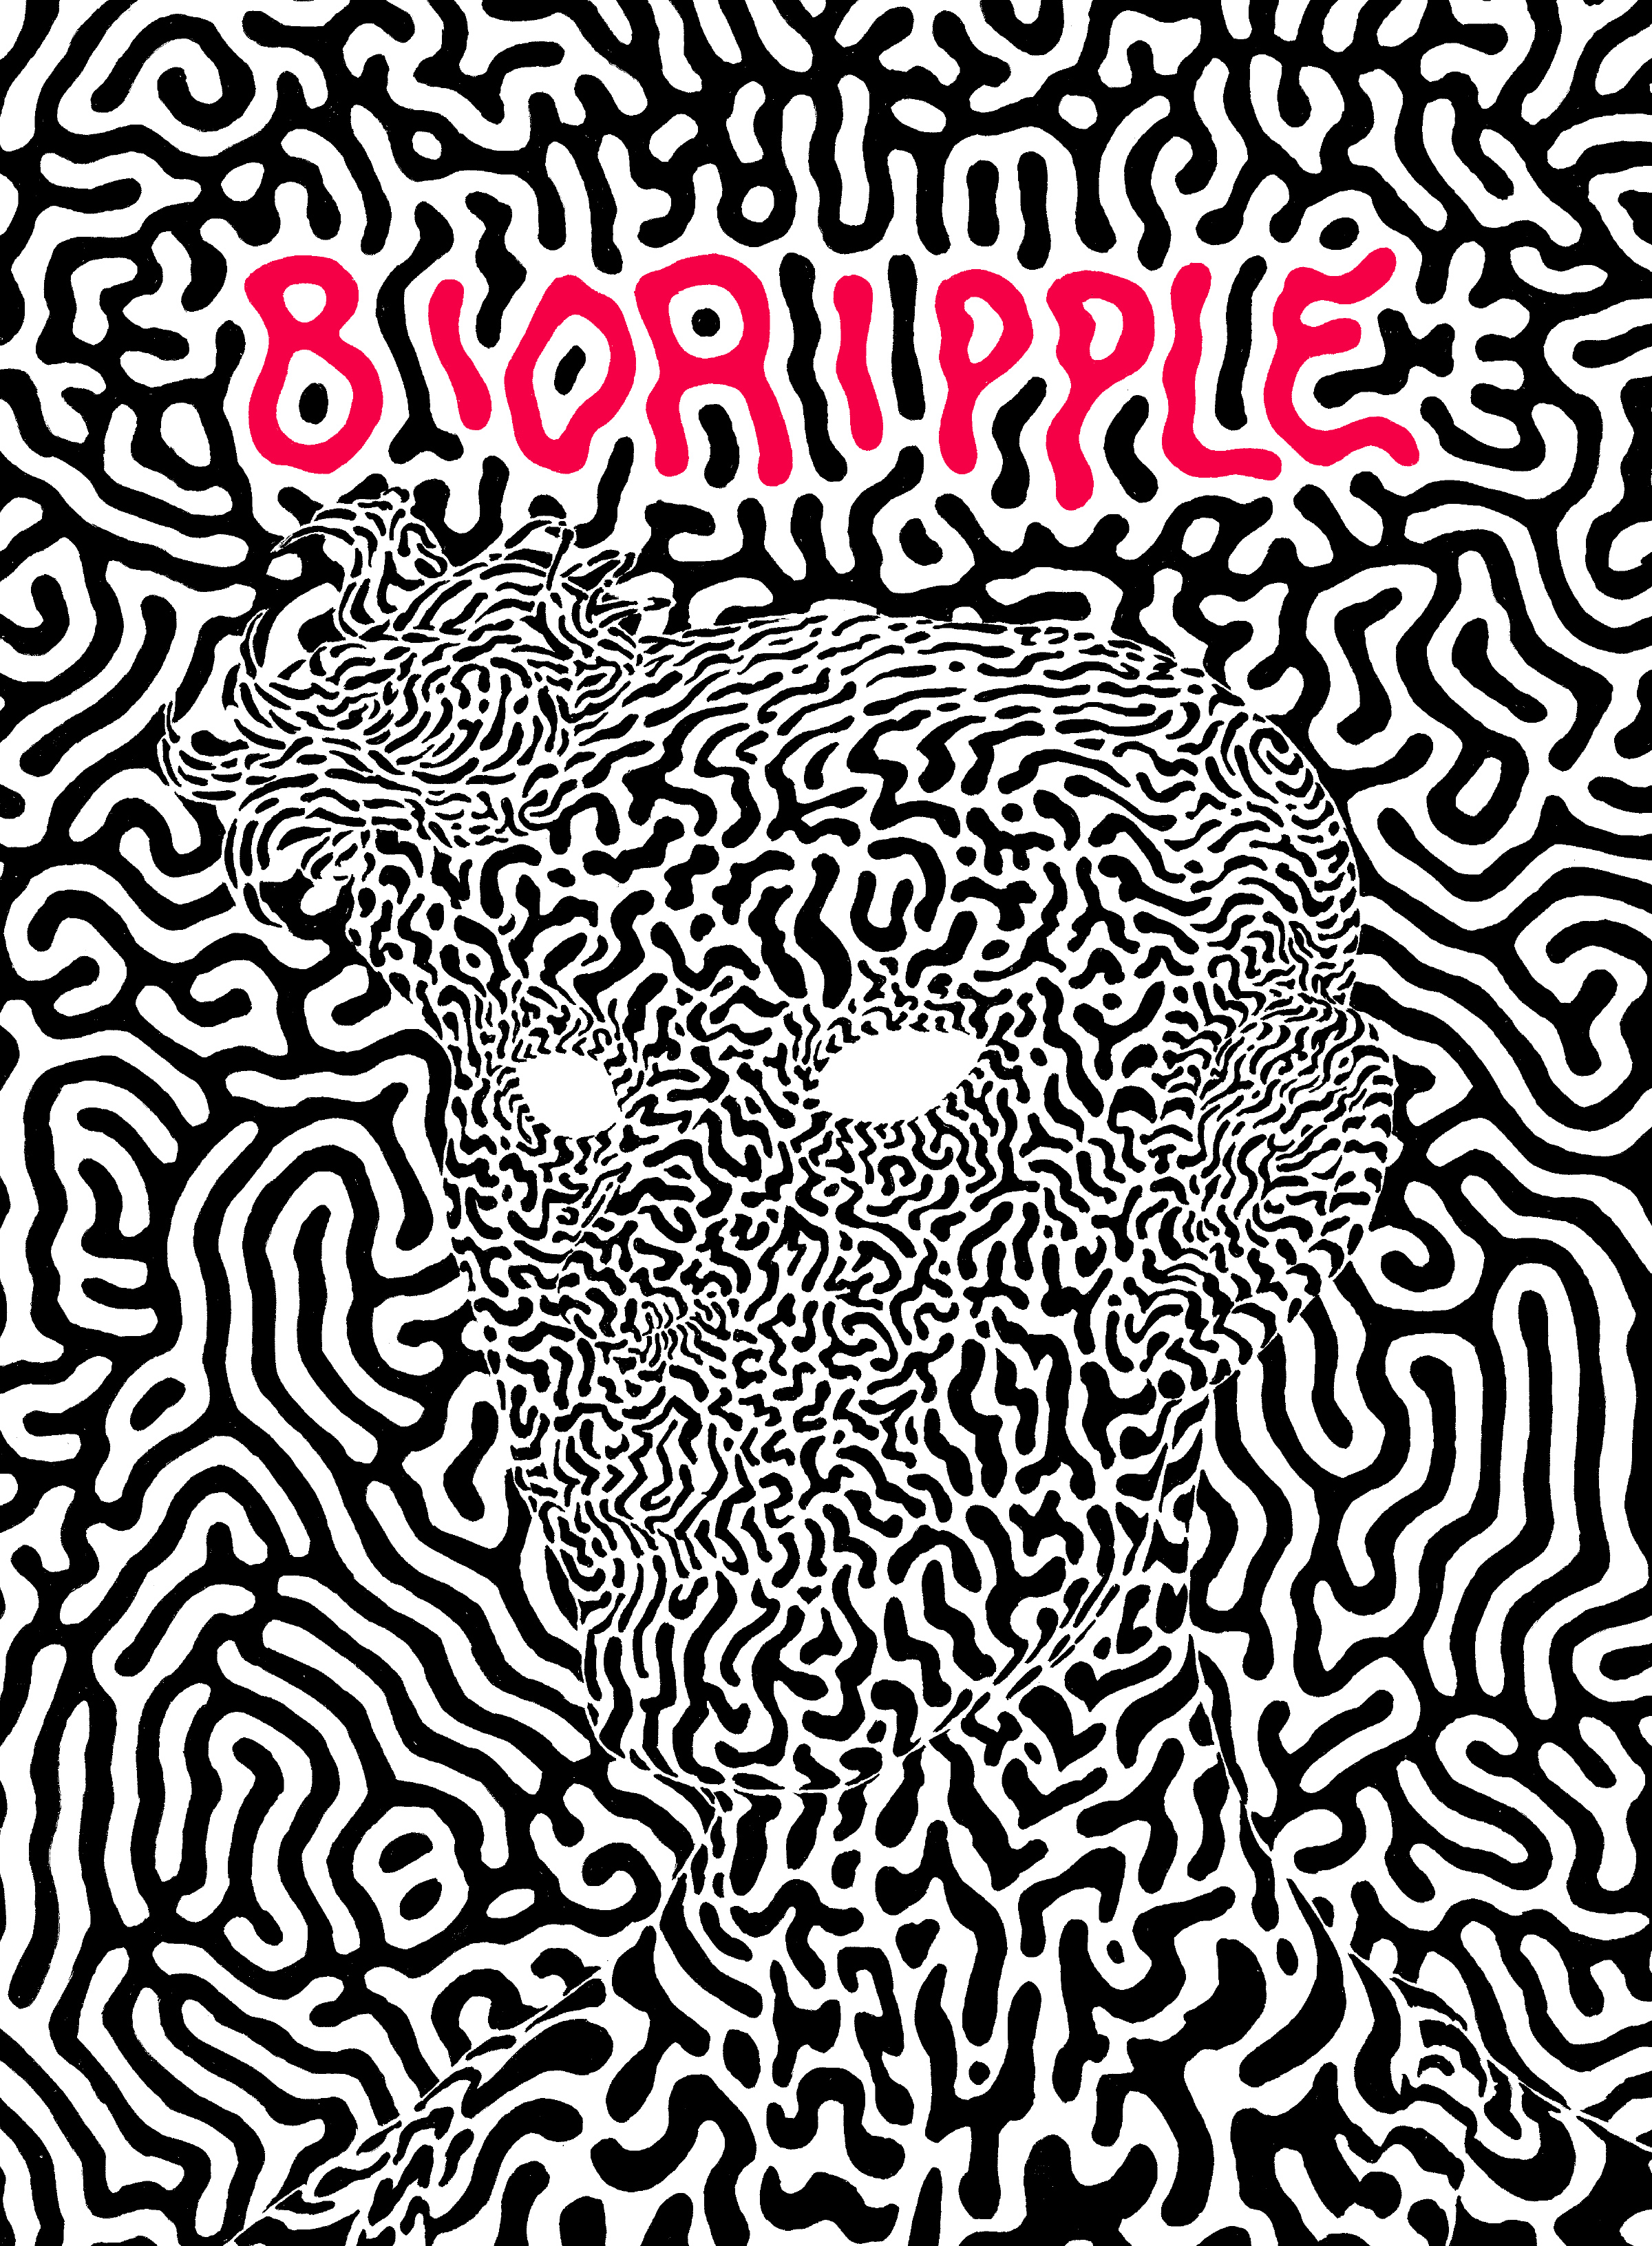 Bioripple (2021): Chapter 1 - Page 1